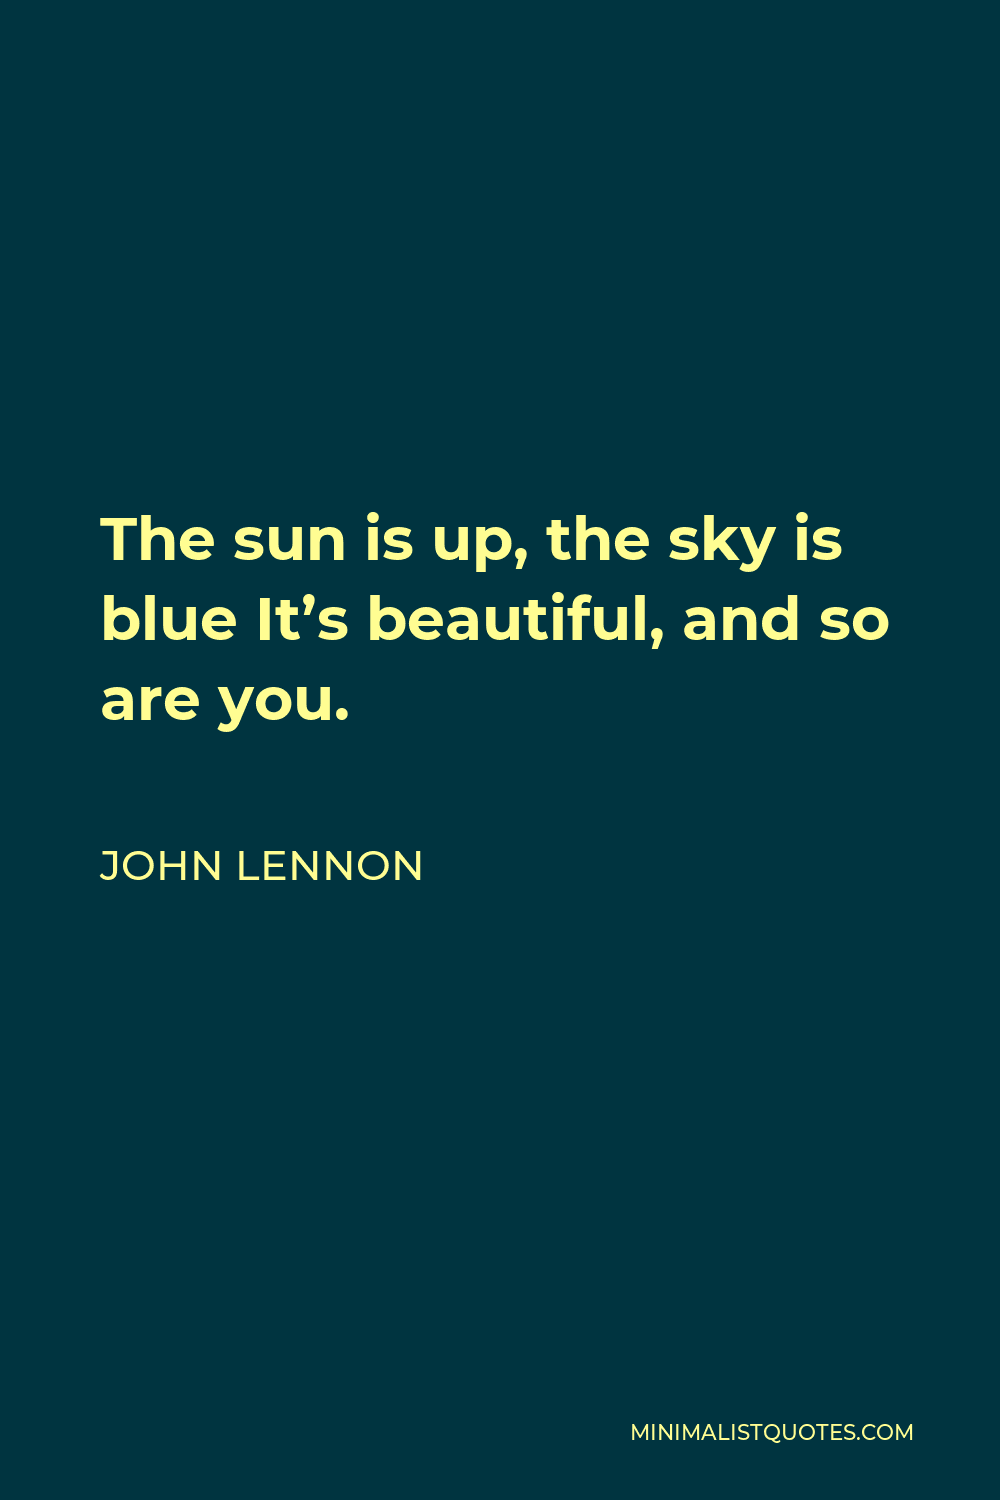 John Lennon Quote: The sun is up, the sky is blue It's beautiful, and ...